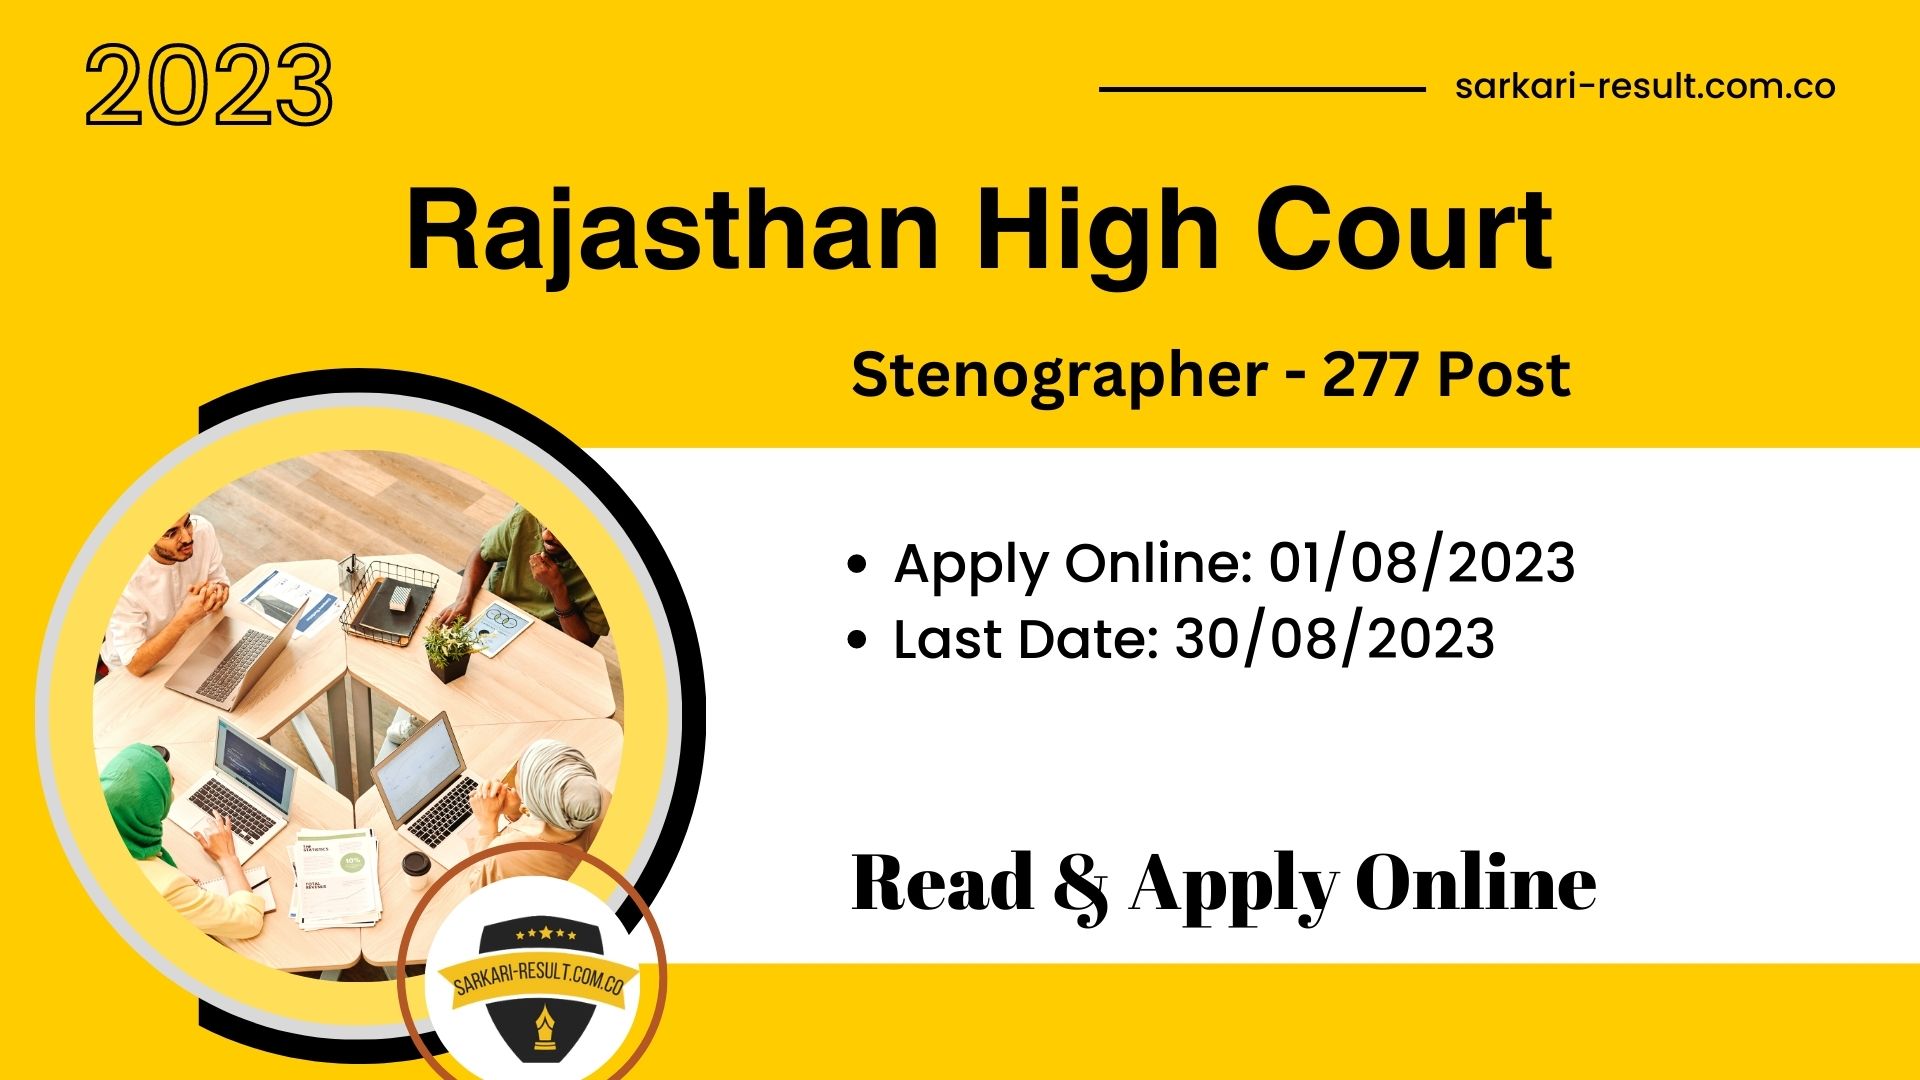 Apply Online Rajasthan High Court Stenographer Recruitment 2023 for 277 Post